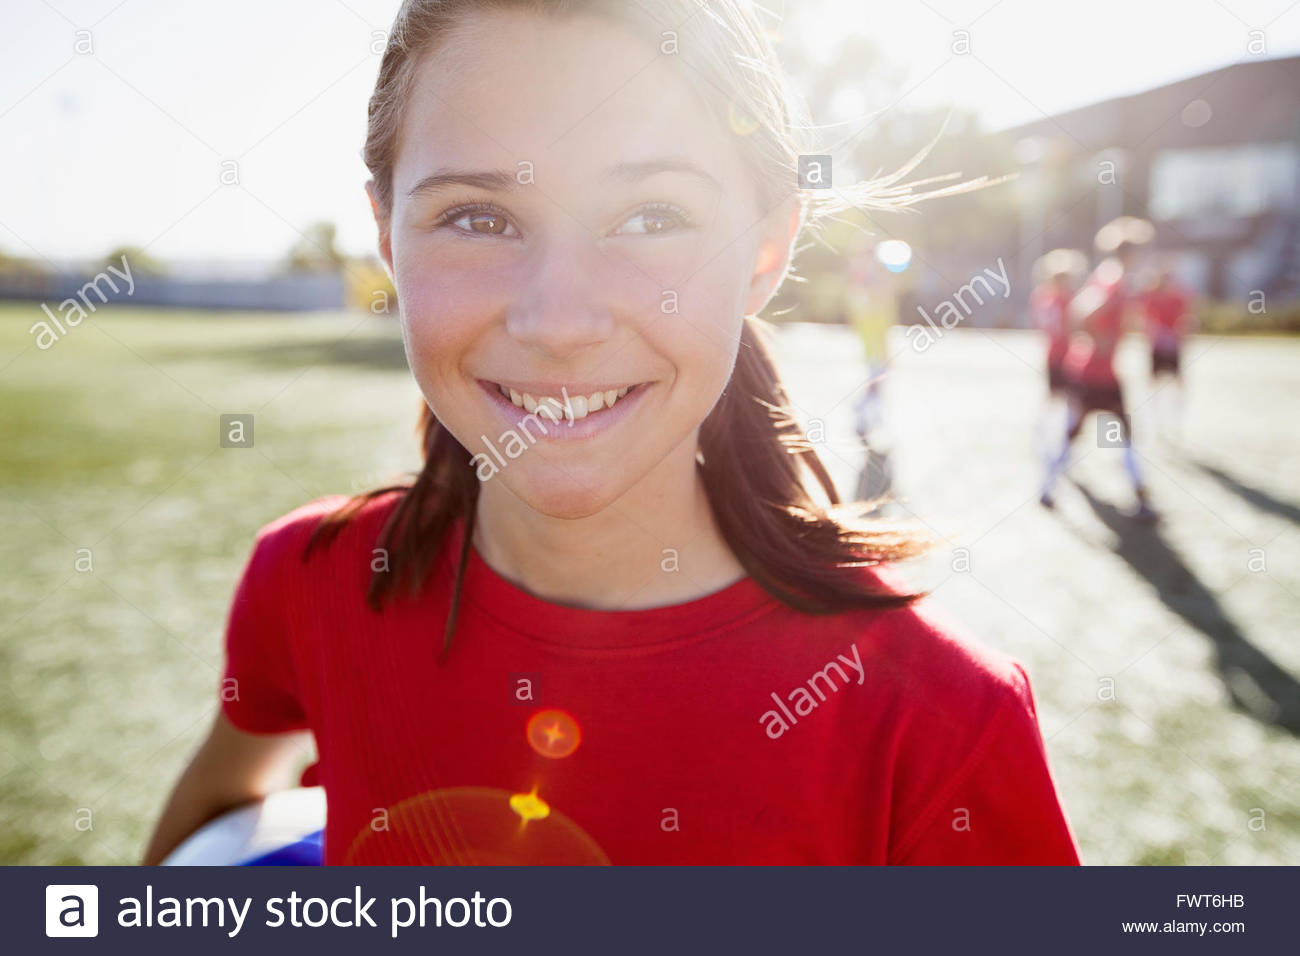 Teenage soccer player with pigtails. Stock Photo